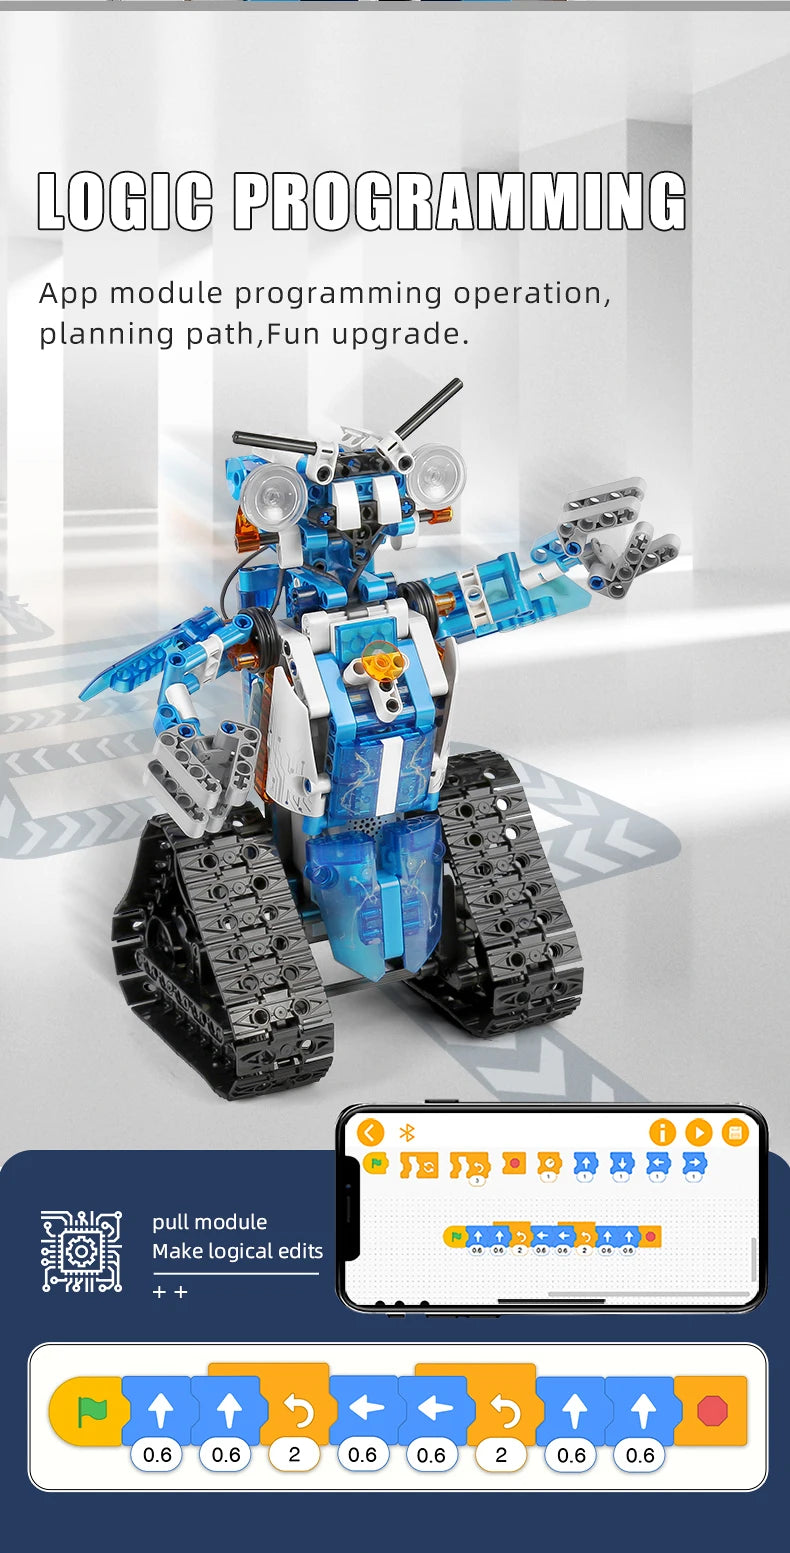 MOULD KING 15059 15078 Technical Robot Toys The APP&RC Motorized Robot With Led Part Model Building Blocks Kids Christmas Gift